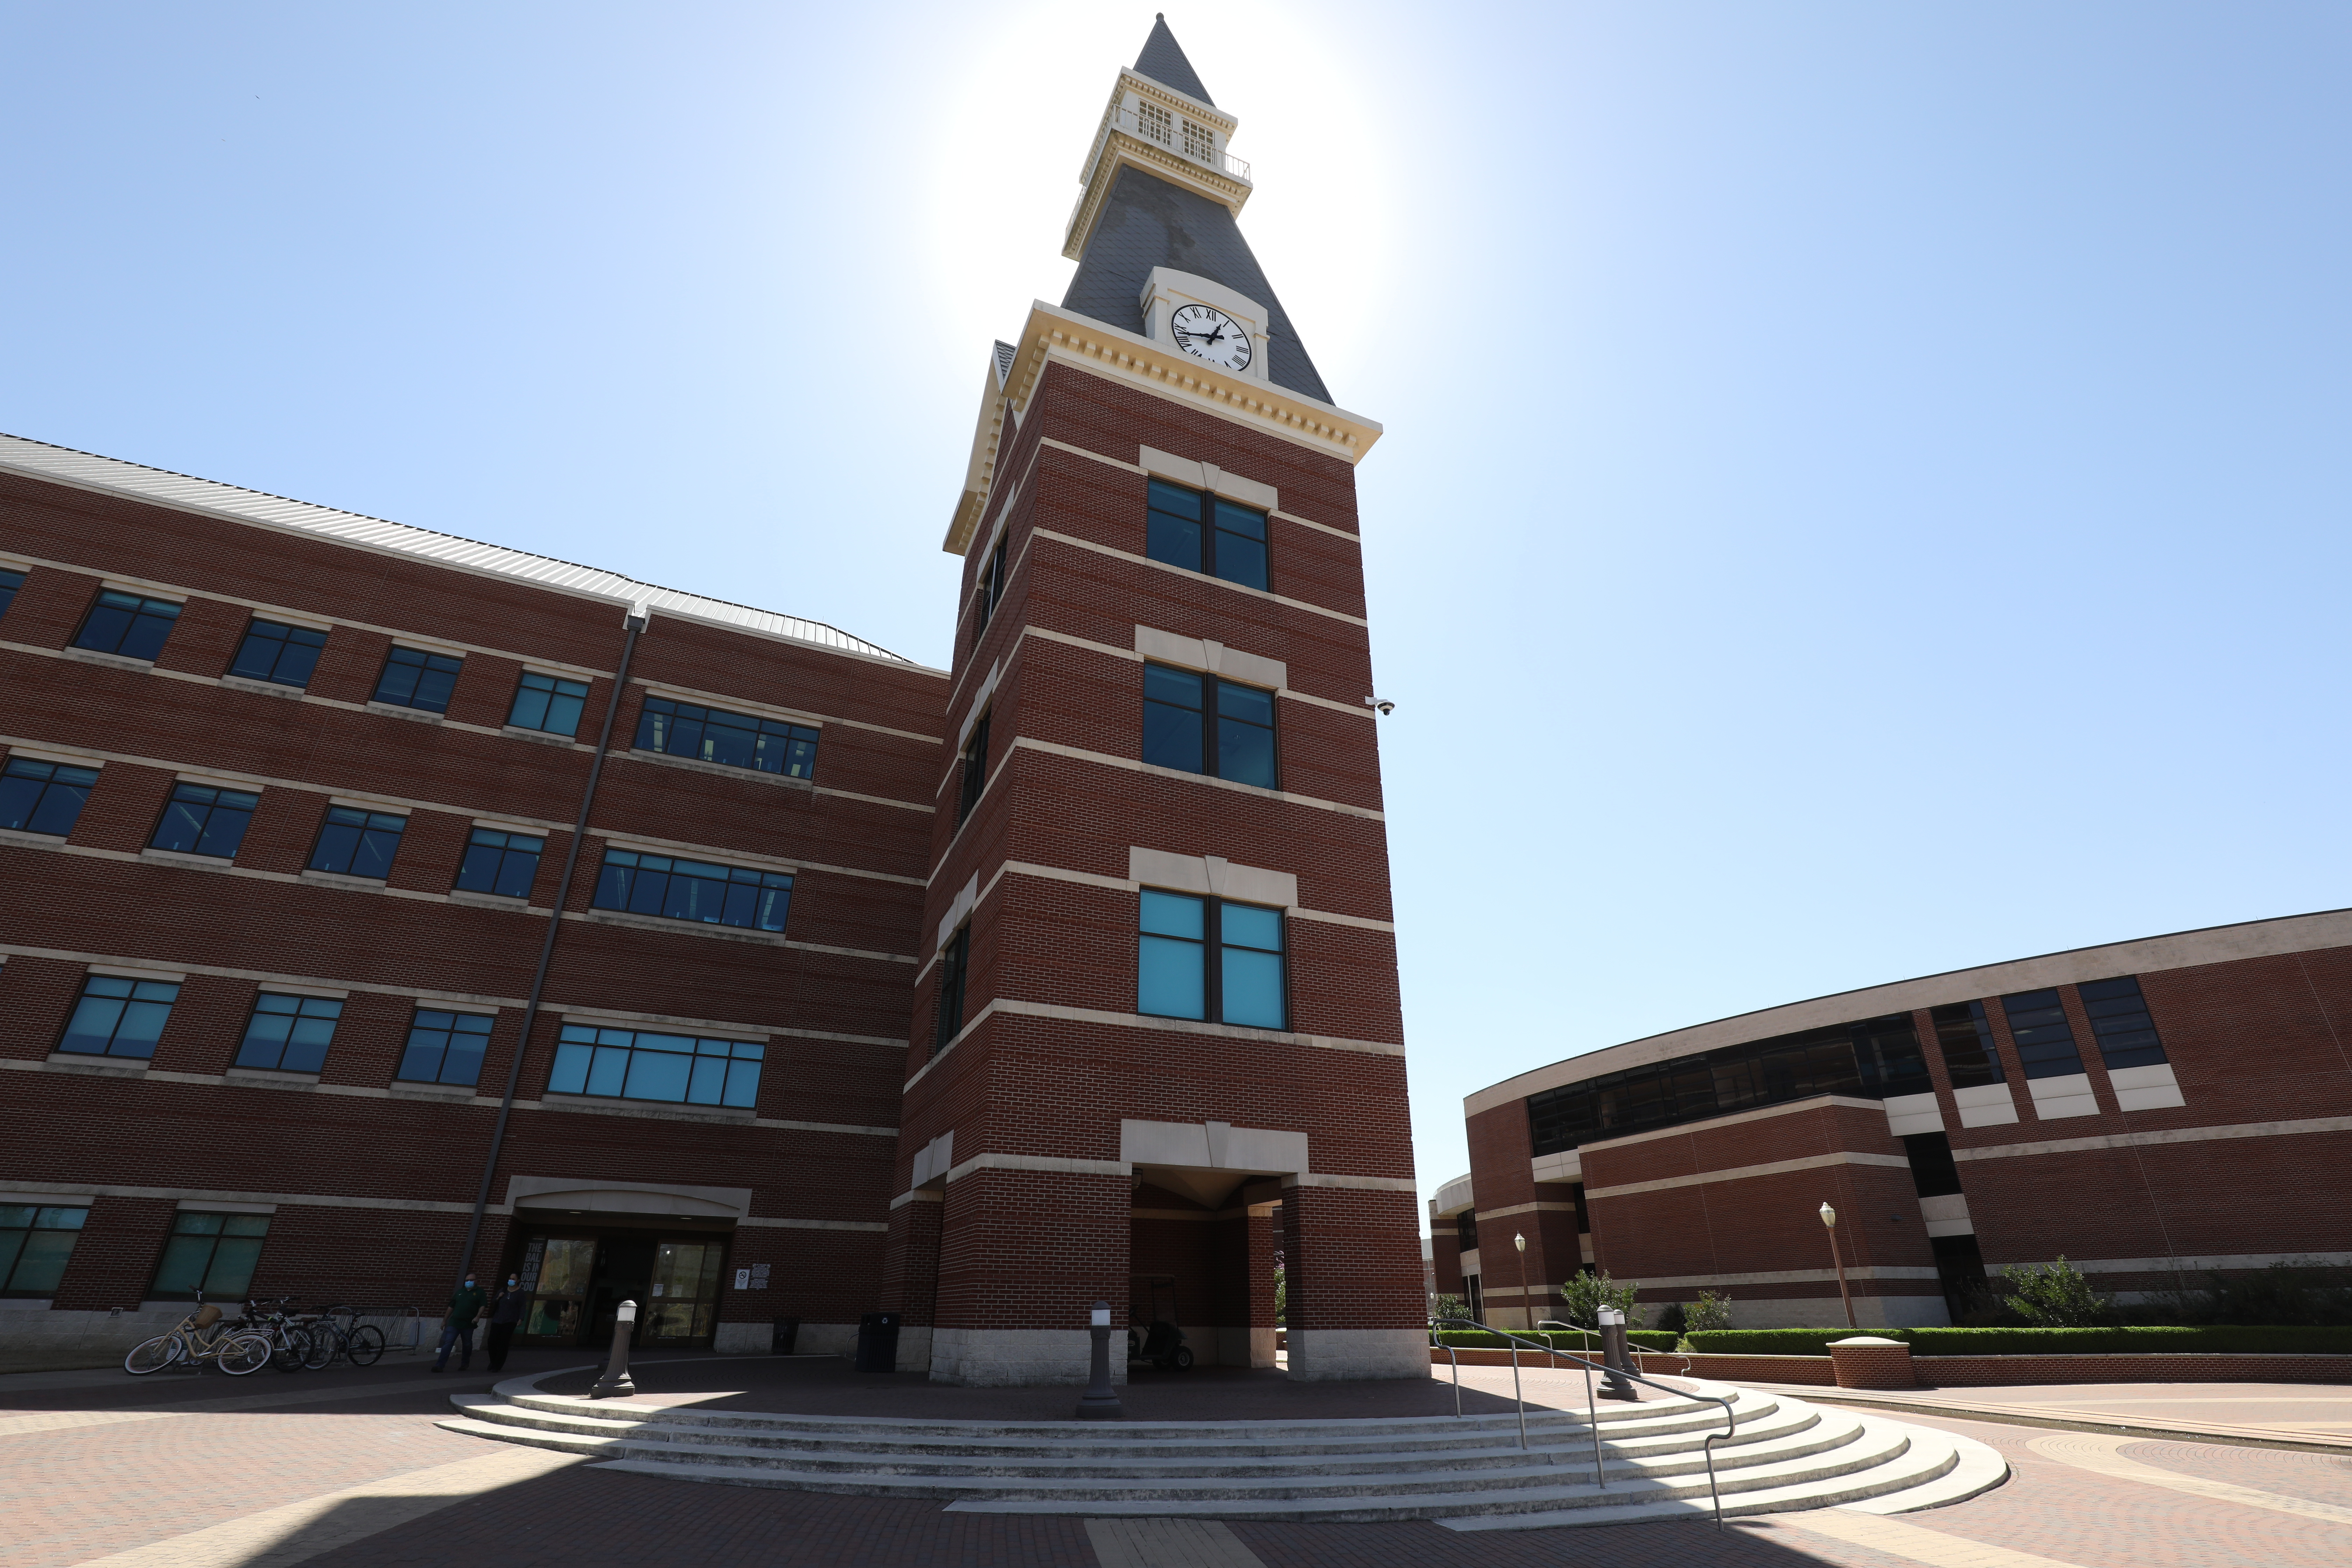 Baylor Graduate and Professional Programs Ranked in U.S. News & World Report's 2022 Edition of Best Graduate Schools